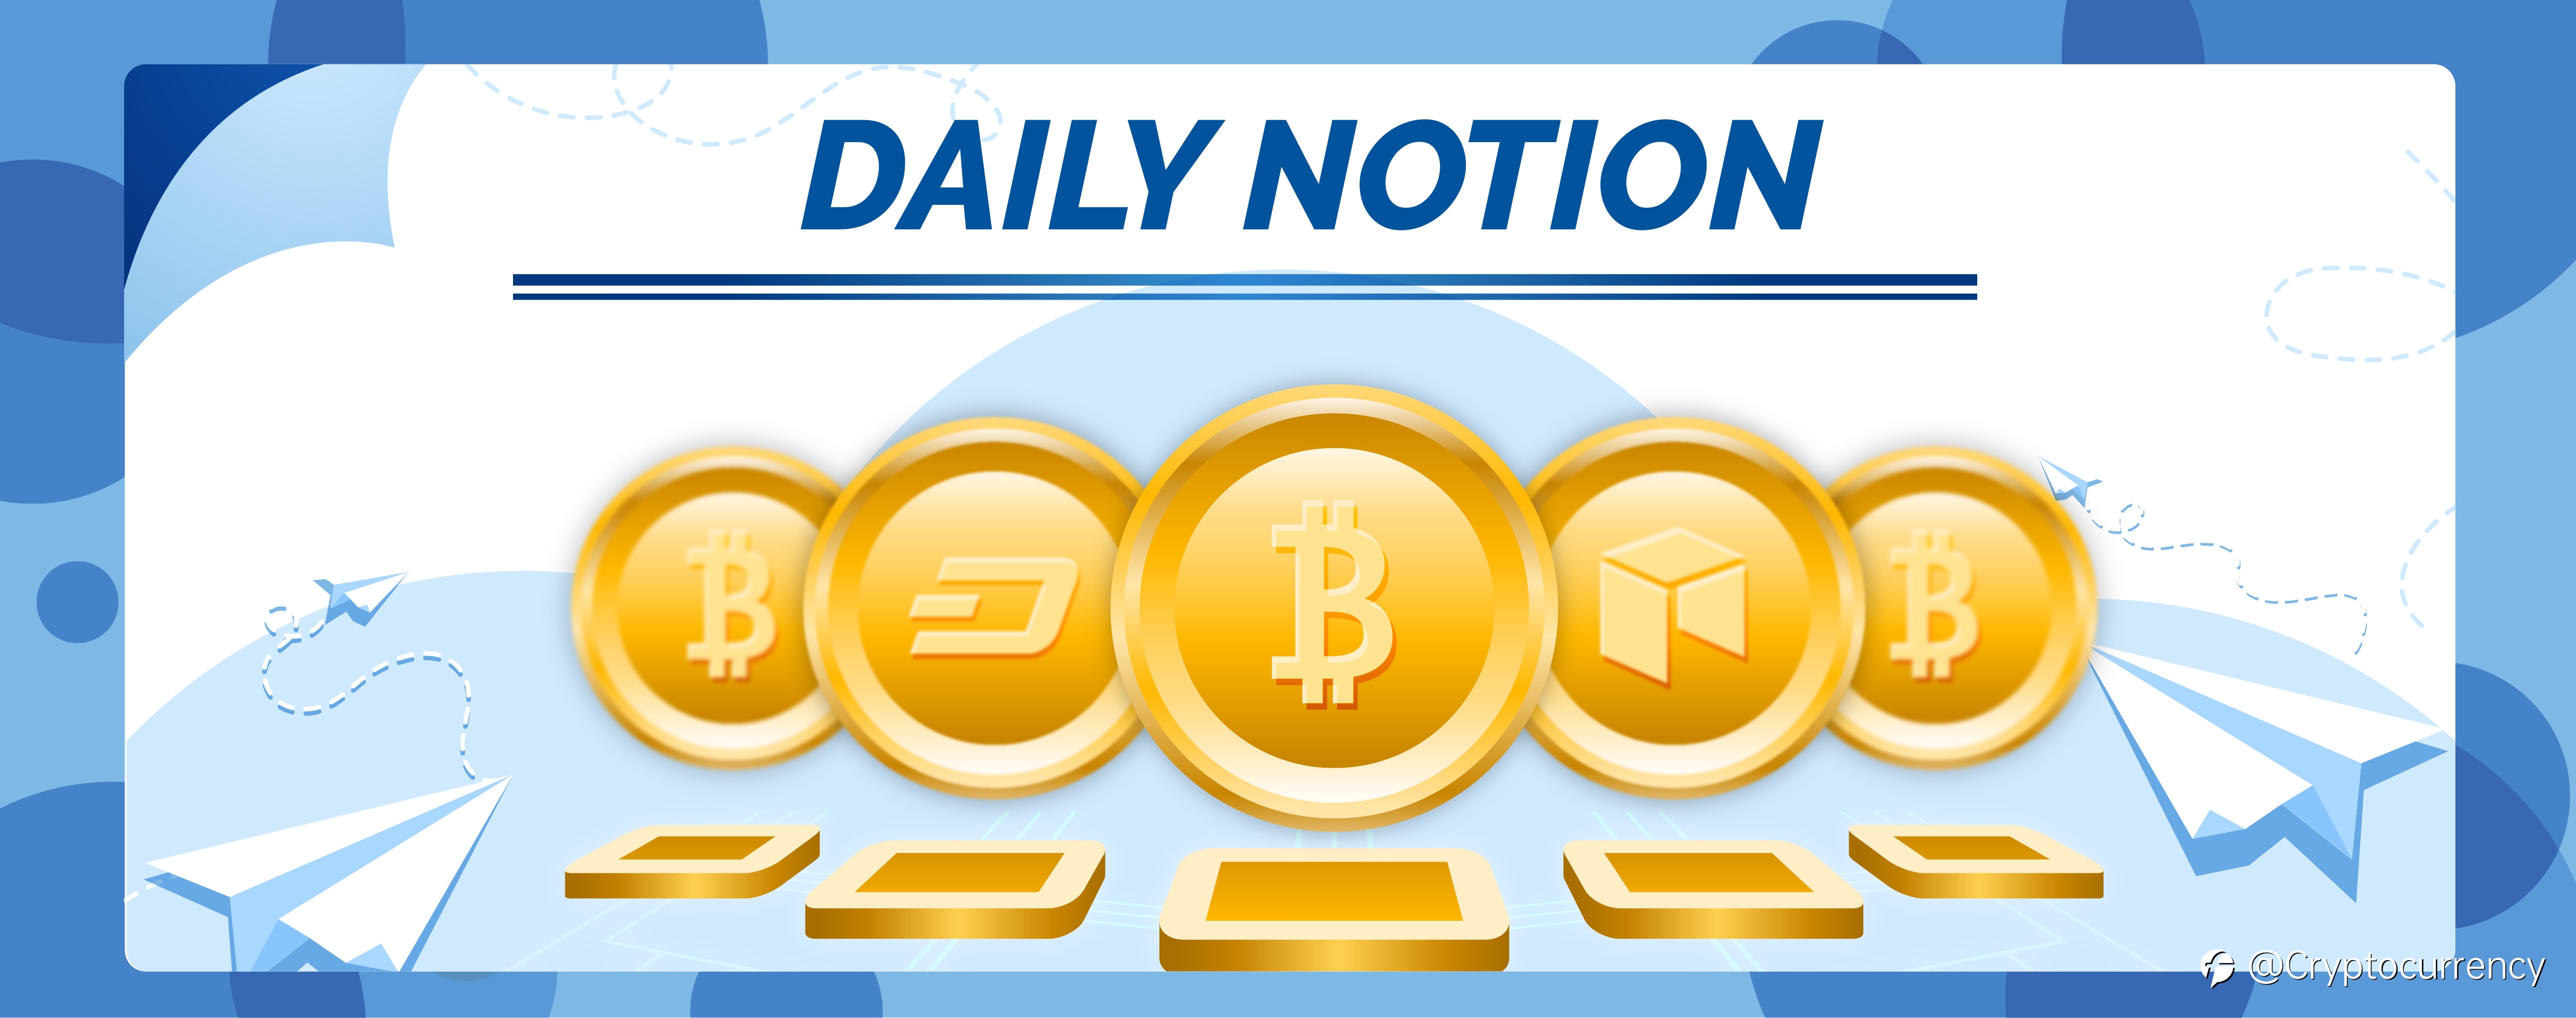 (DAILY NOTION): BTC/USD: The Bulls Have Resurfaced, How Long Will They Stay?